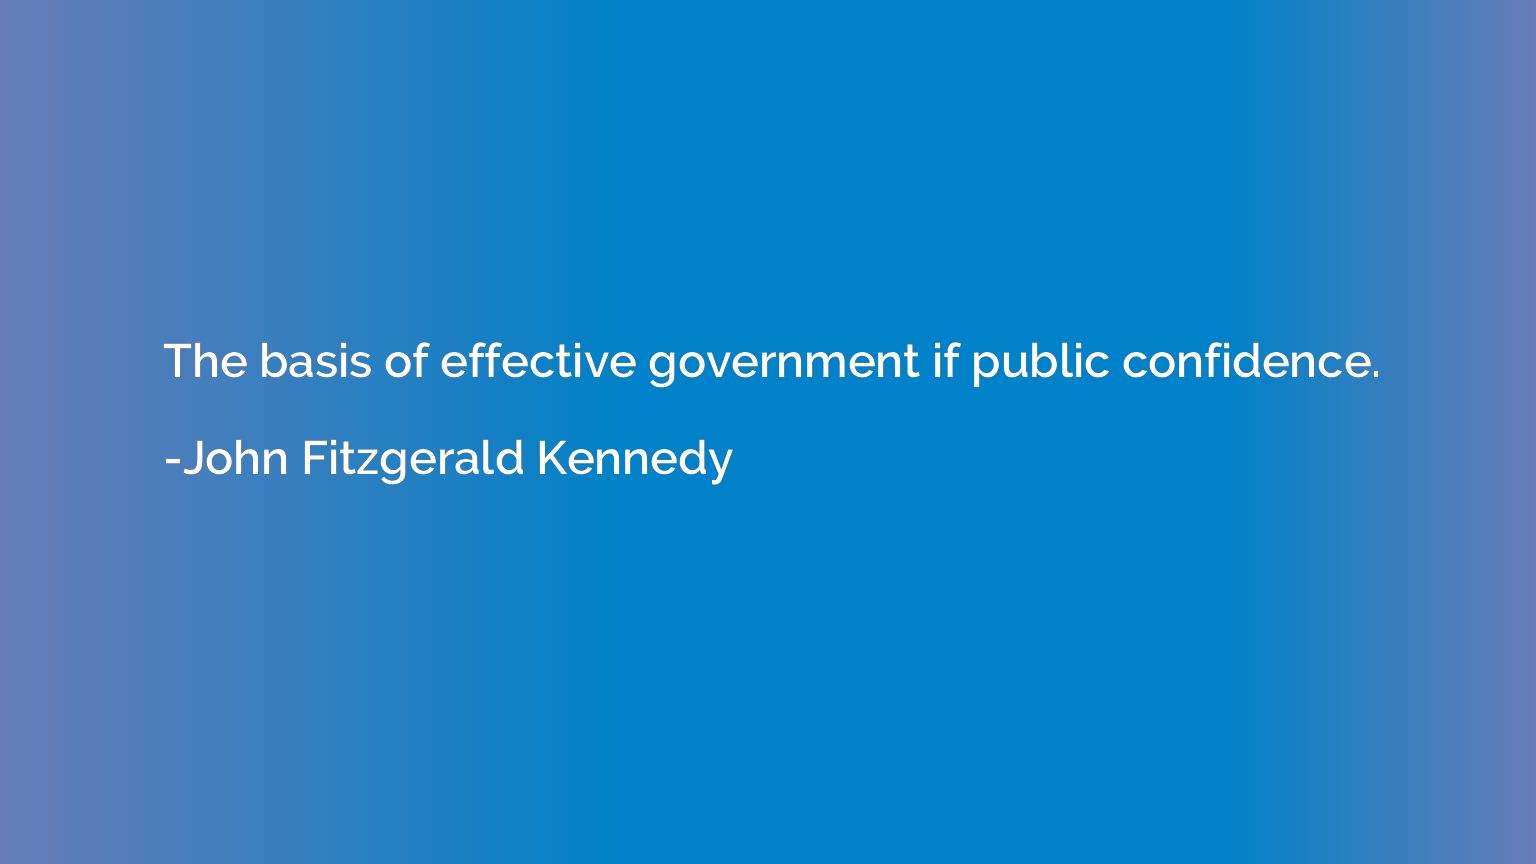 The basis of effective government if public confidence.